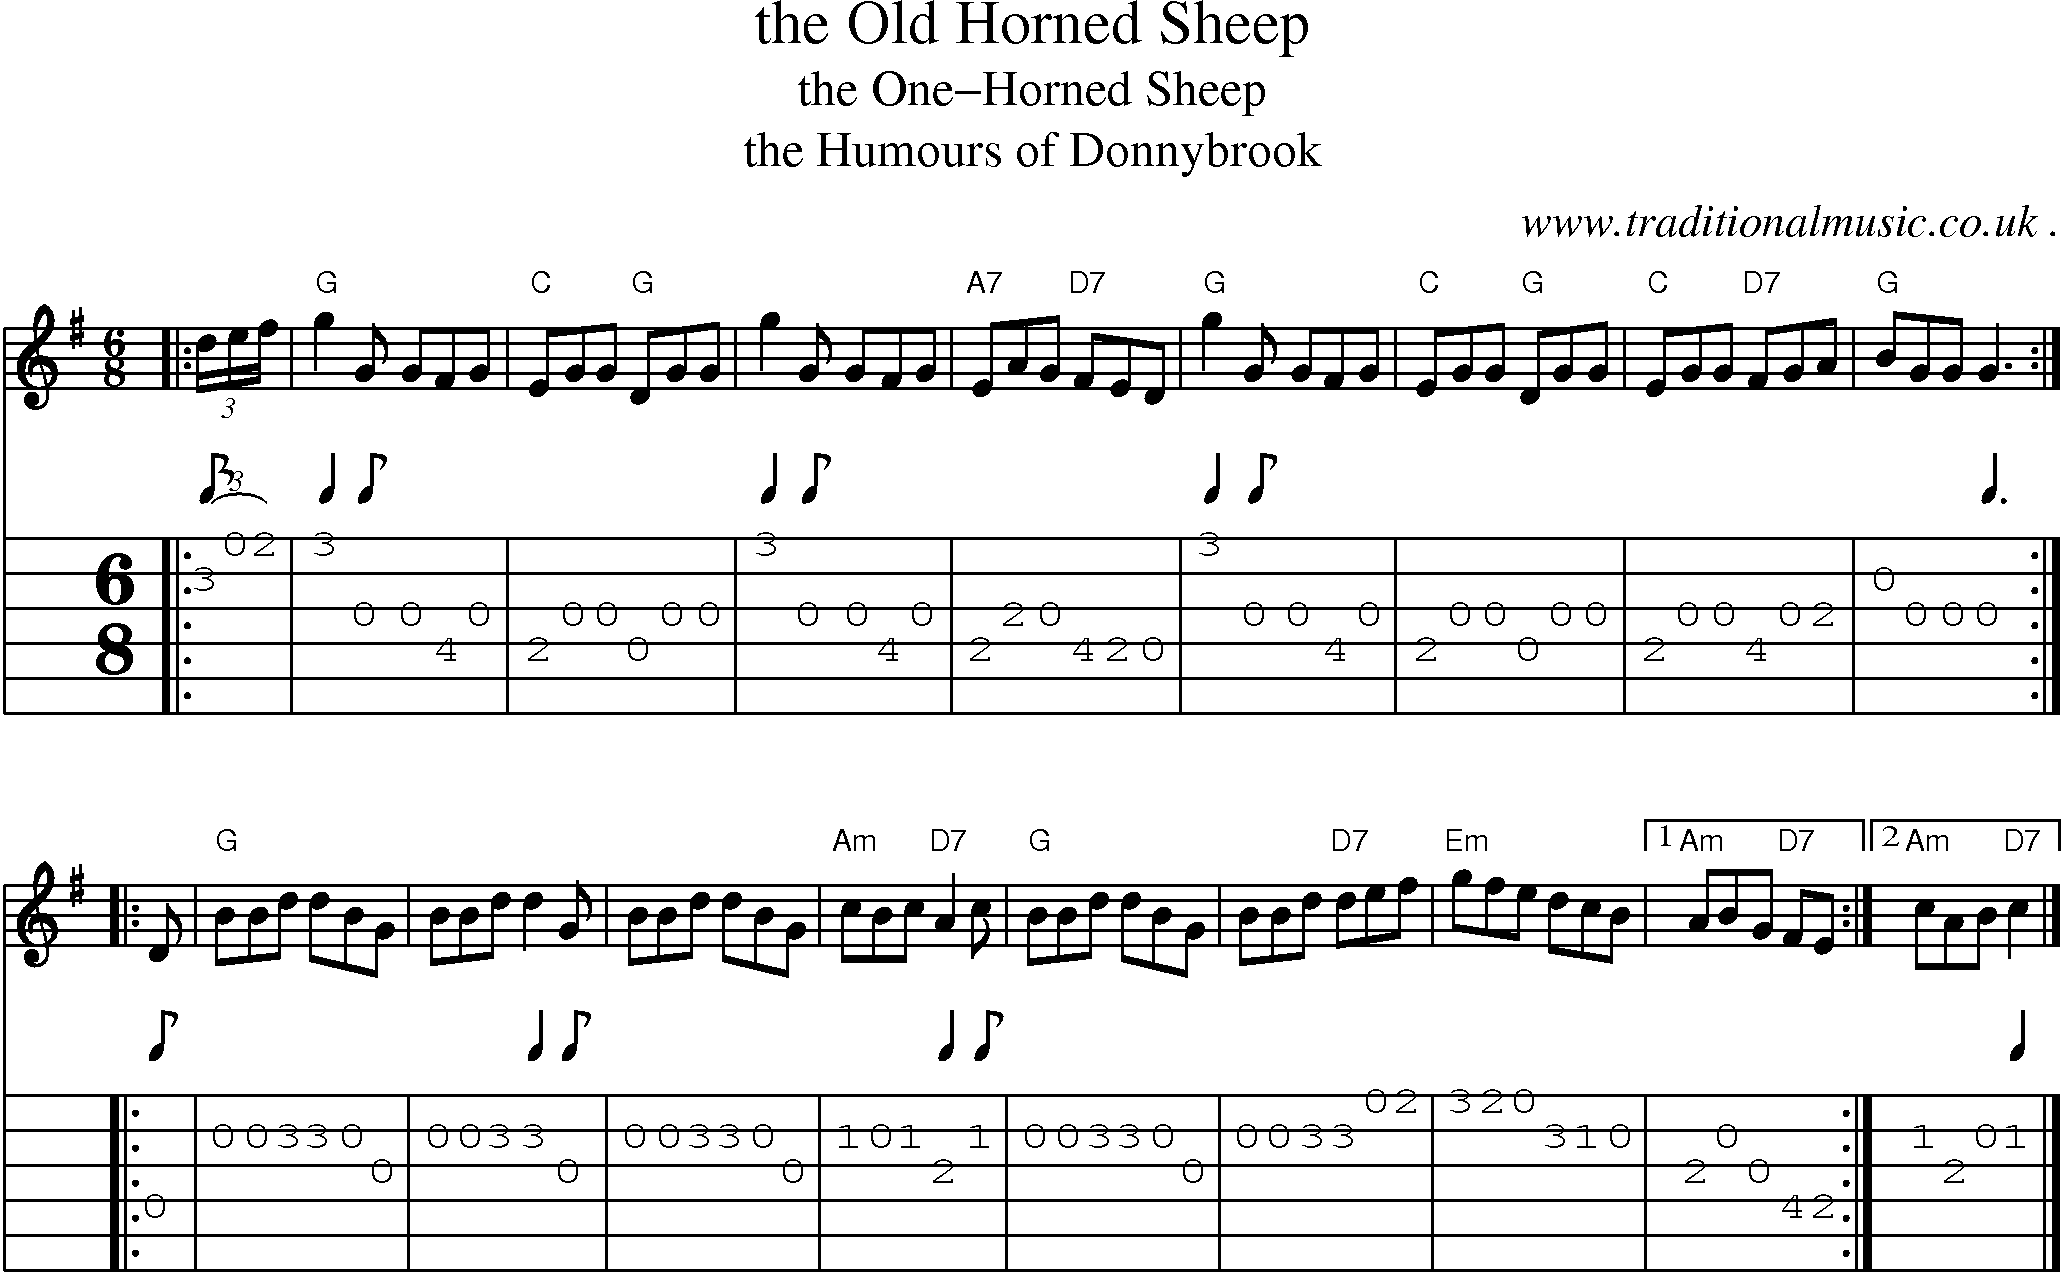 Sheet-music  score, Chords and Guitar Tabs for The Old Horned Sheep